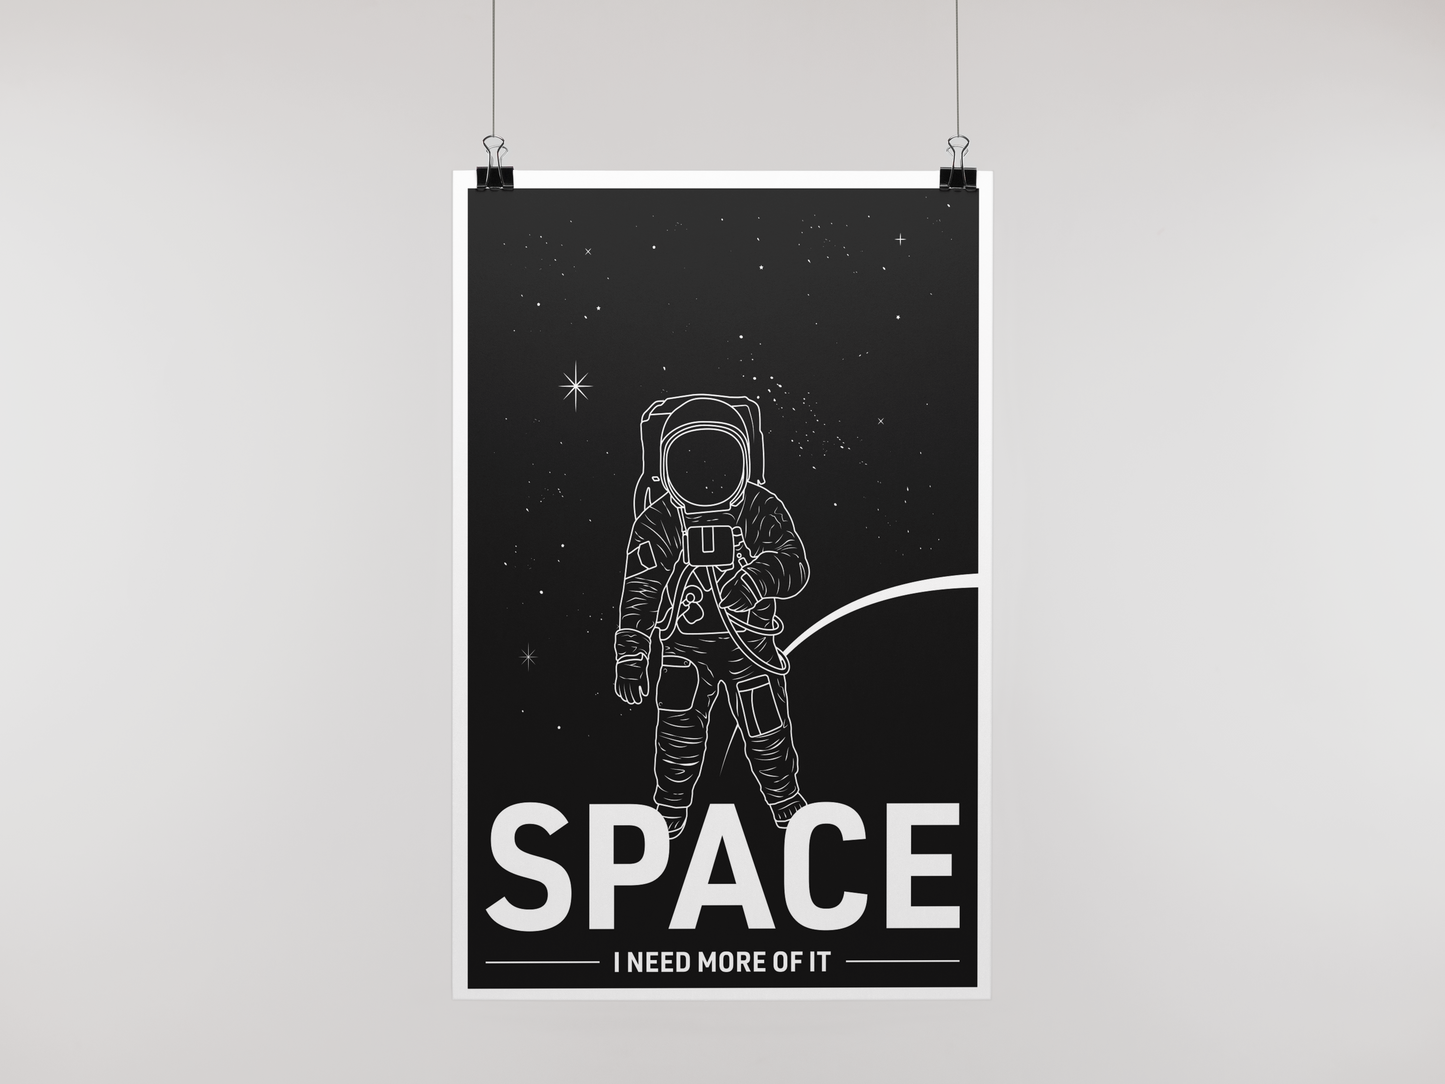 More Space